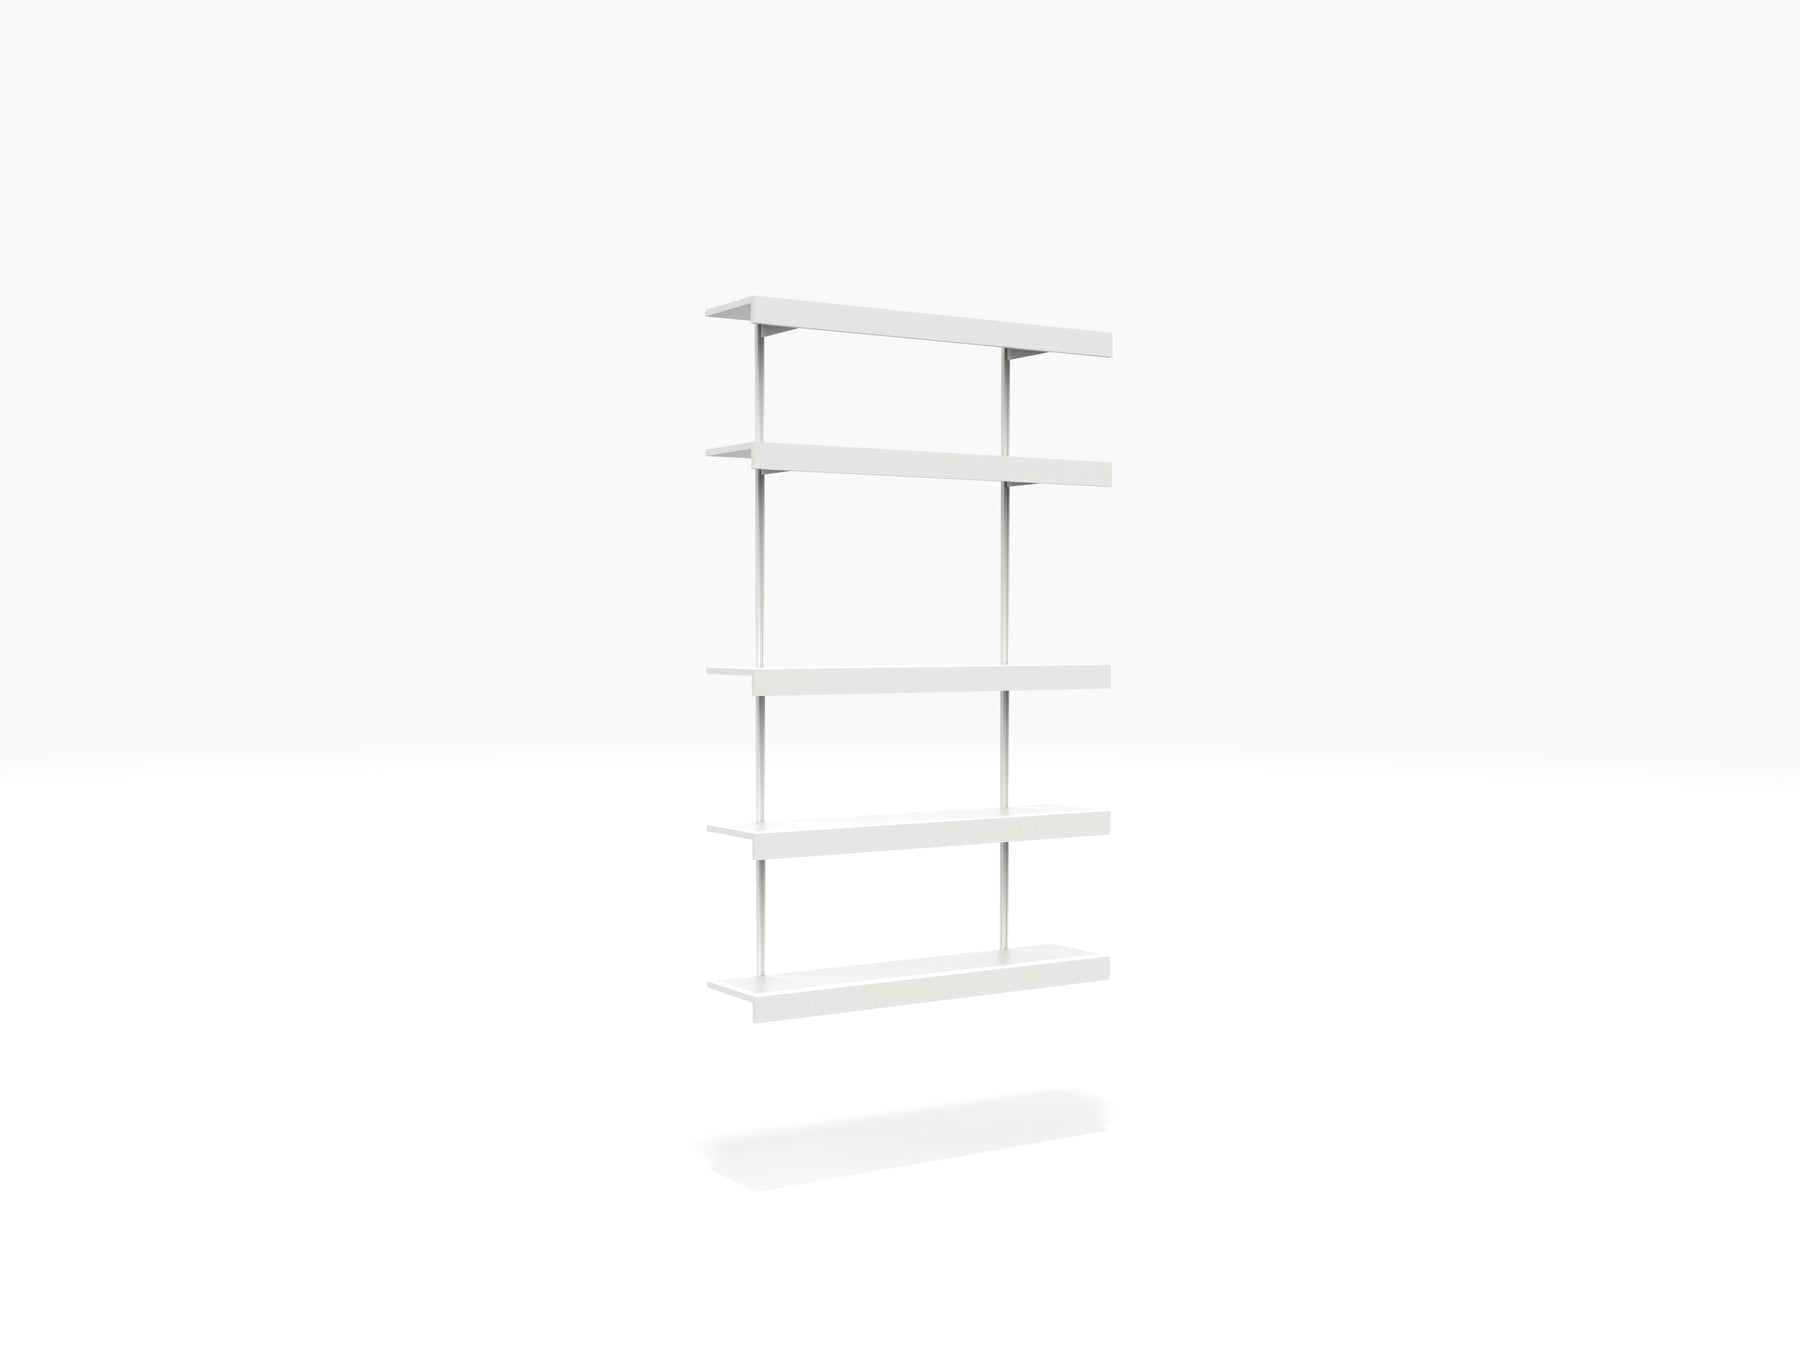 Alcove shelving system in white with display area